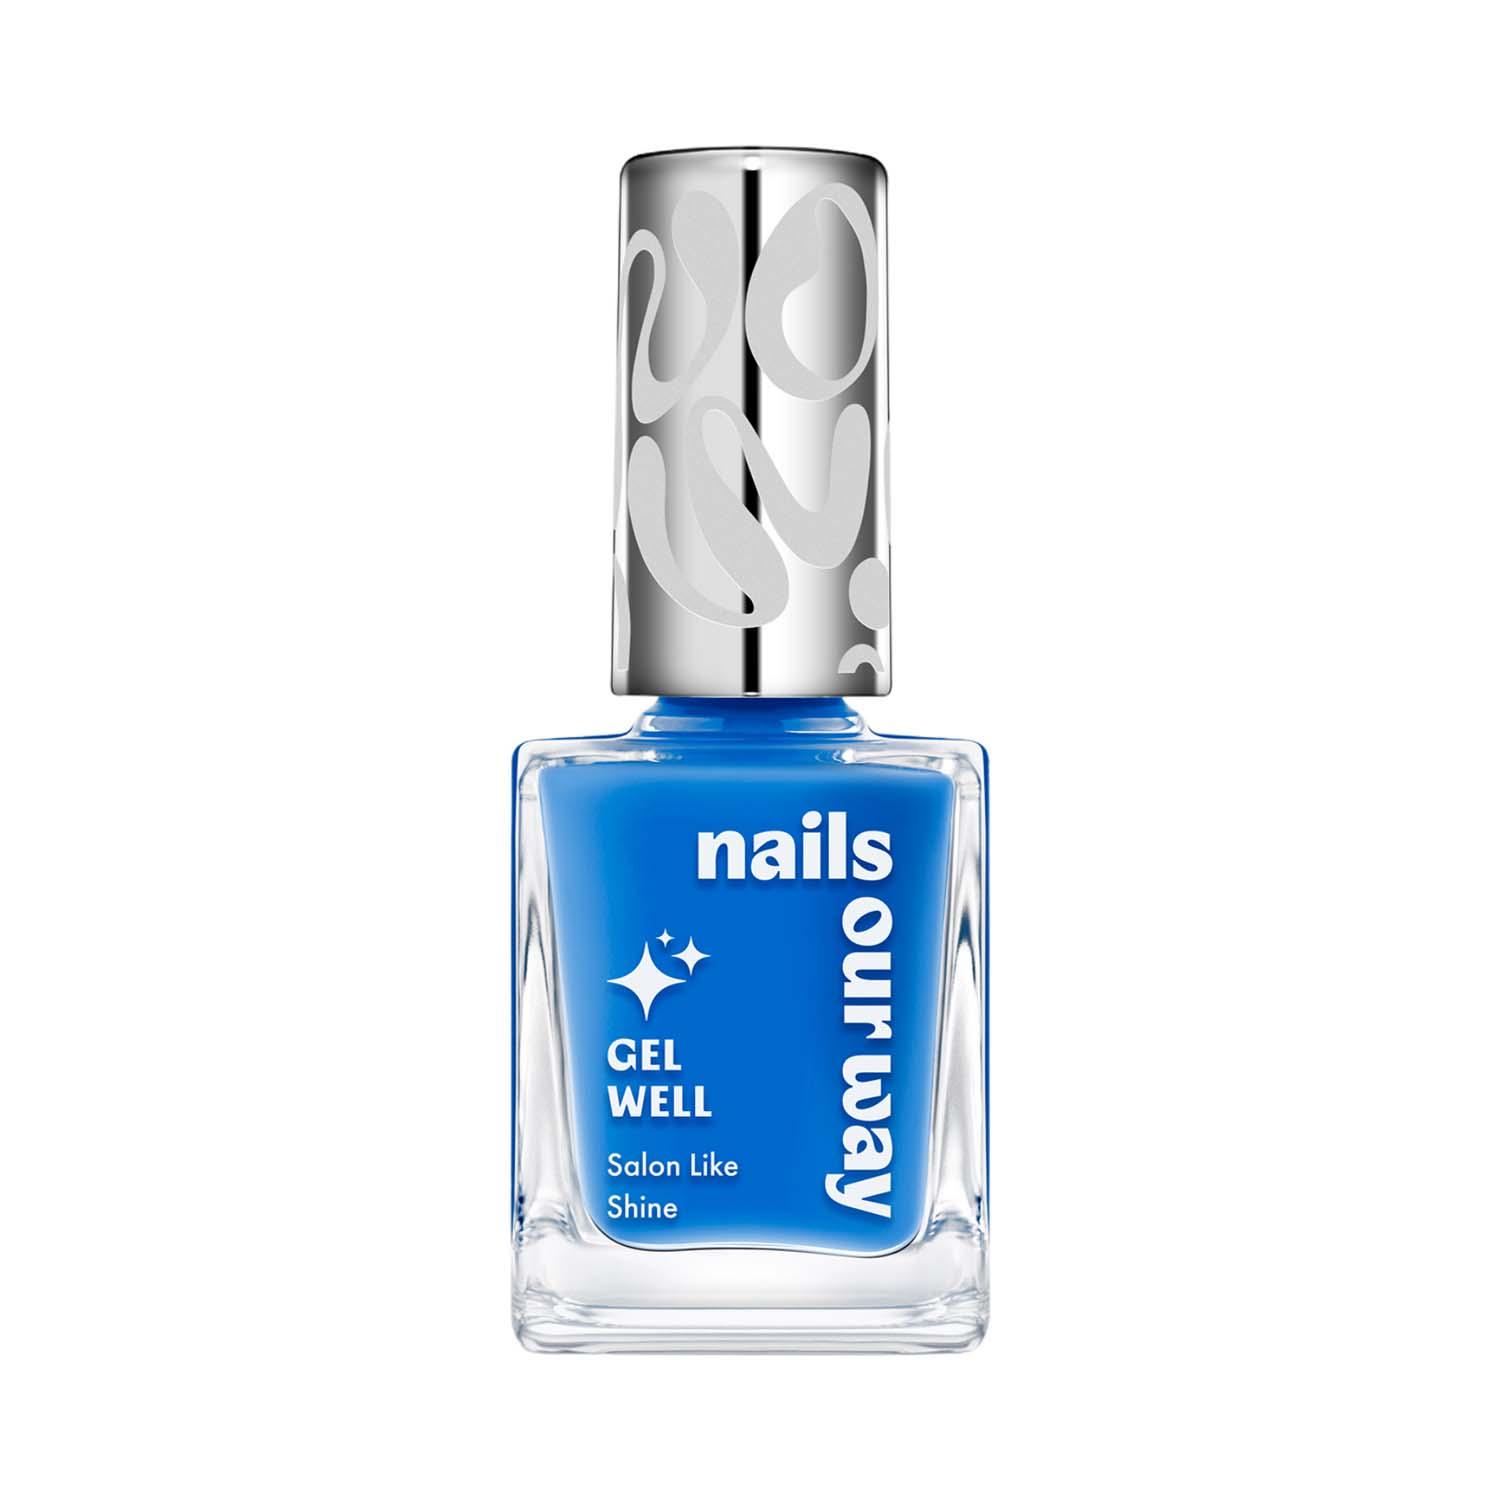 Nails Our Way | Nails Our Way Gel Well Nail Enamel - 403 Playful (10 ml)